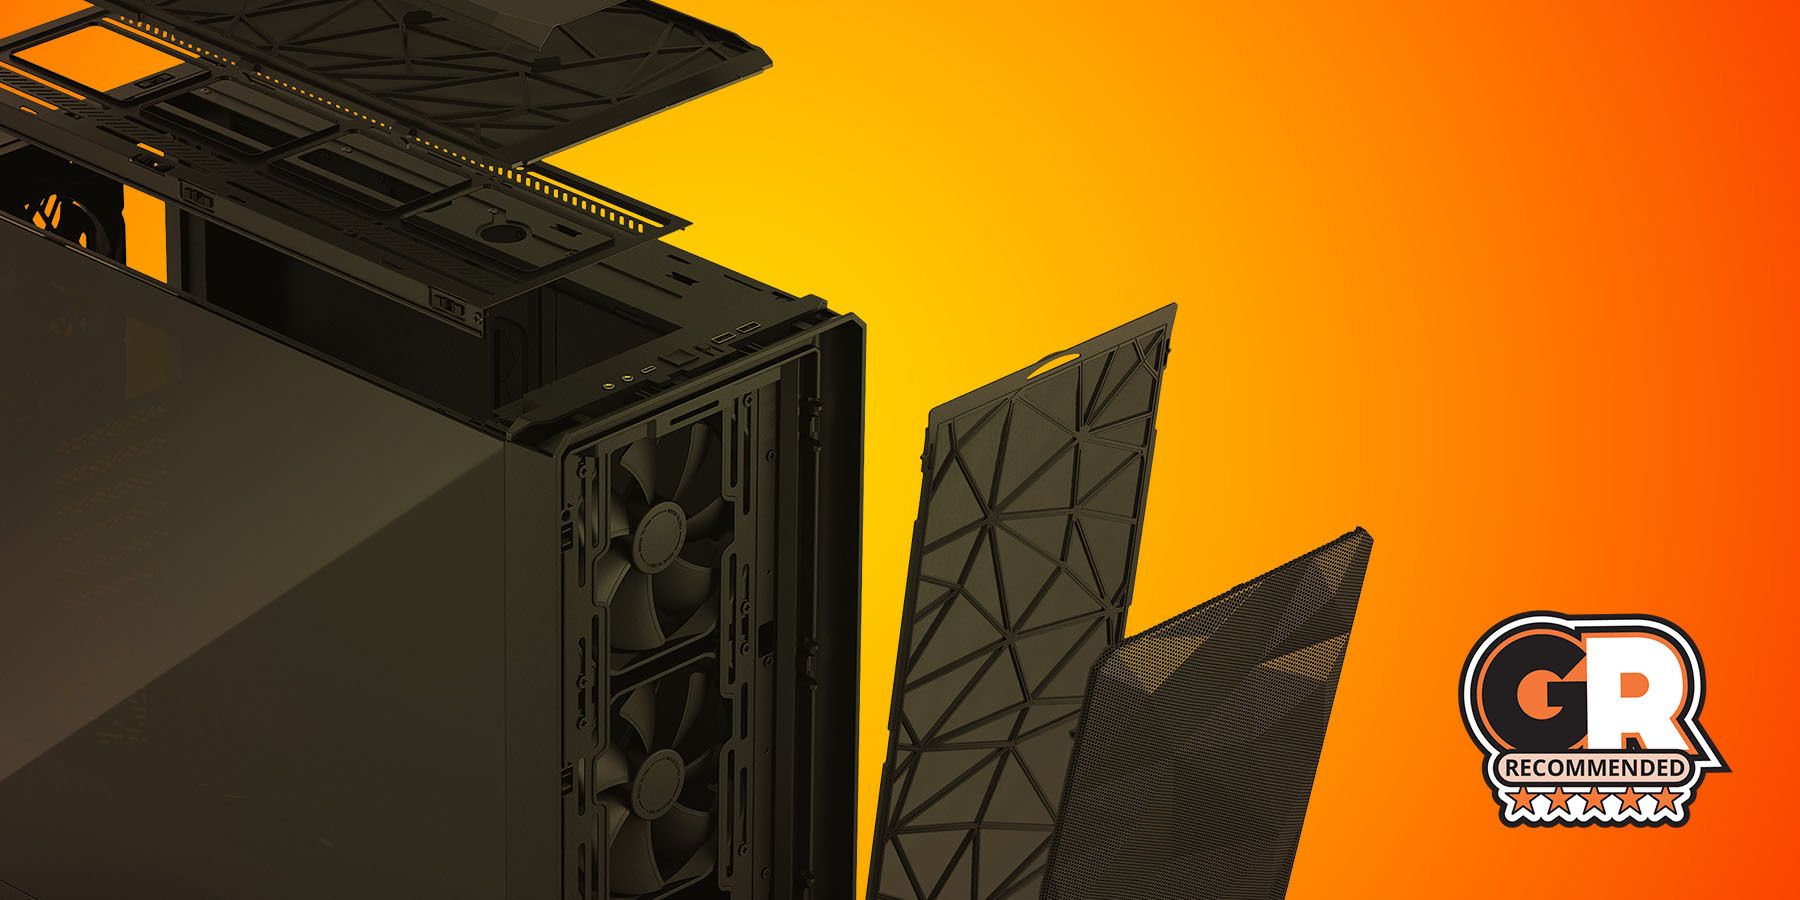 Best PC Cases for Airflow Featured Image